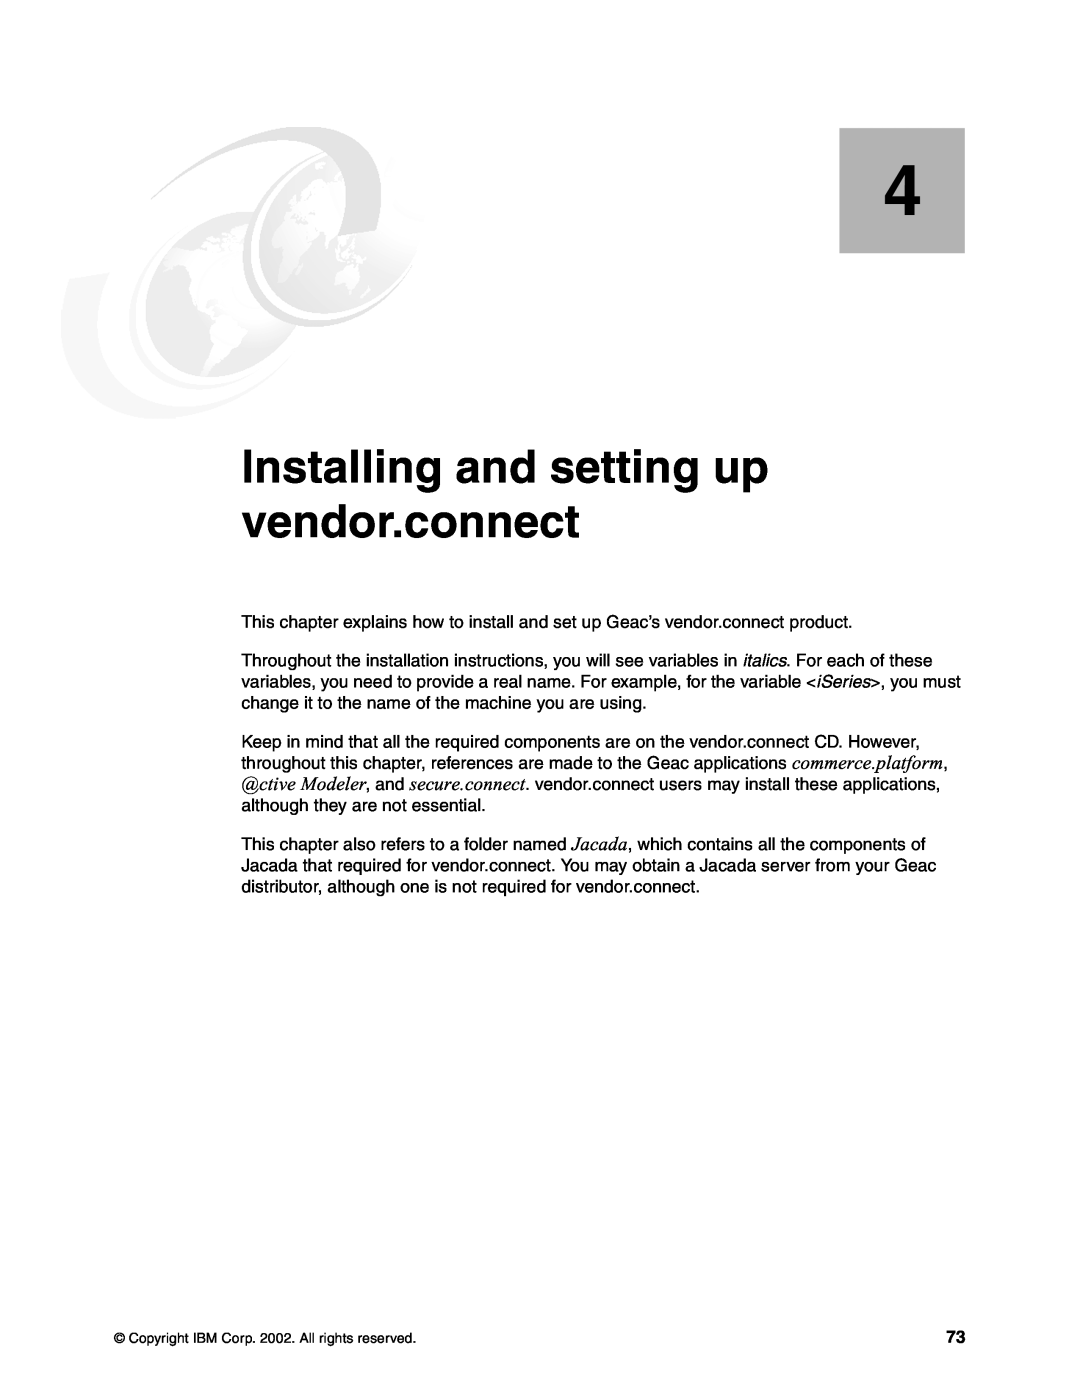 IBM SG24-6526-00 manual Installing and setting up vendor.connect, Copyright IBM Corp. 2002. All rights reserved 